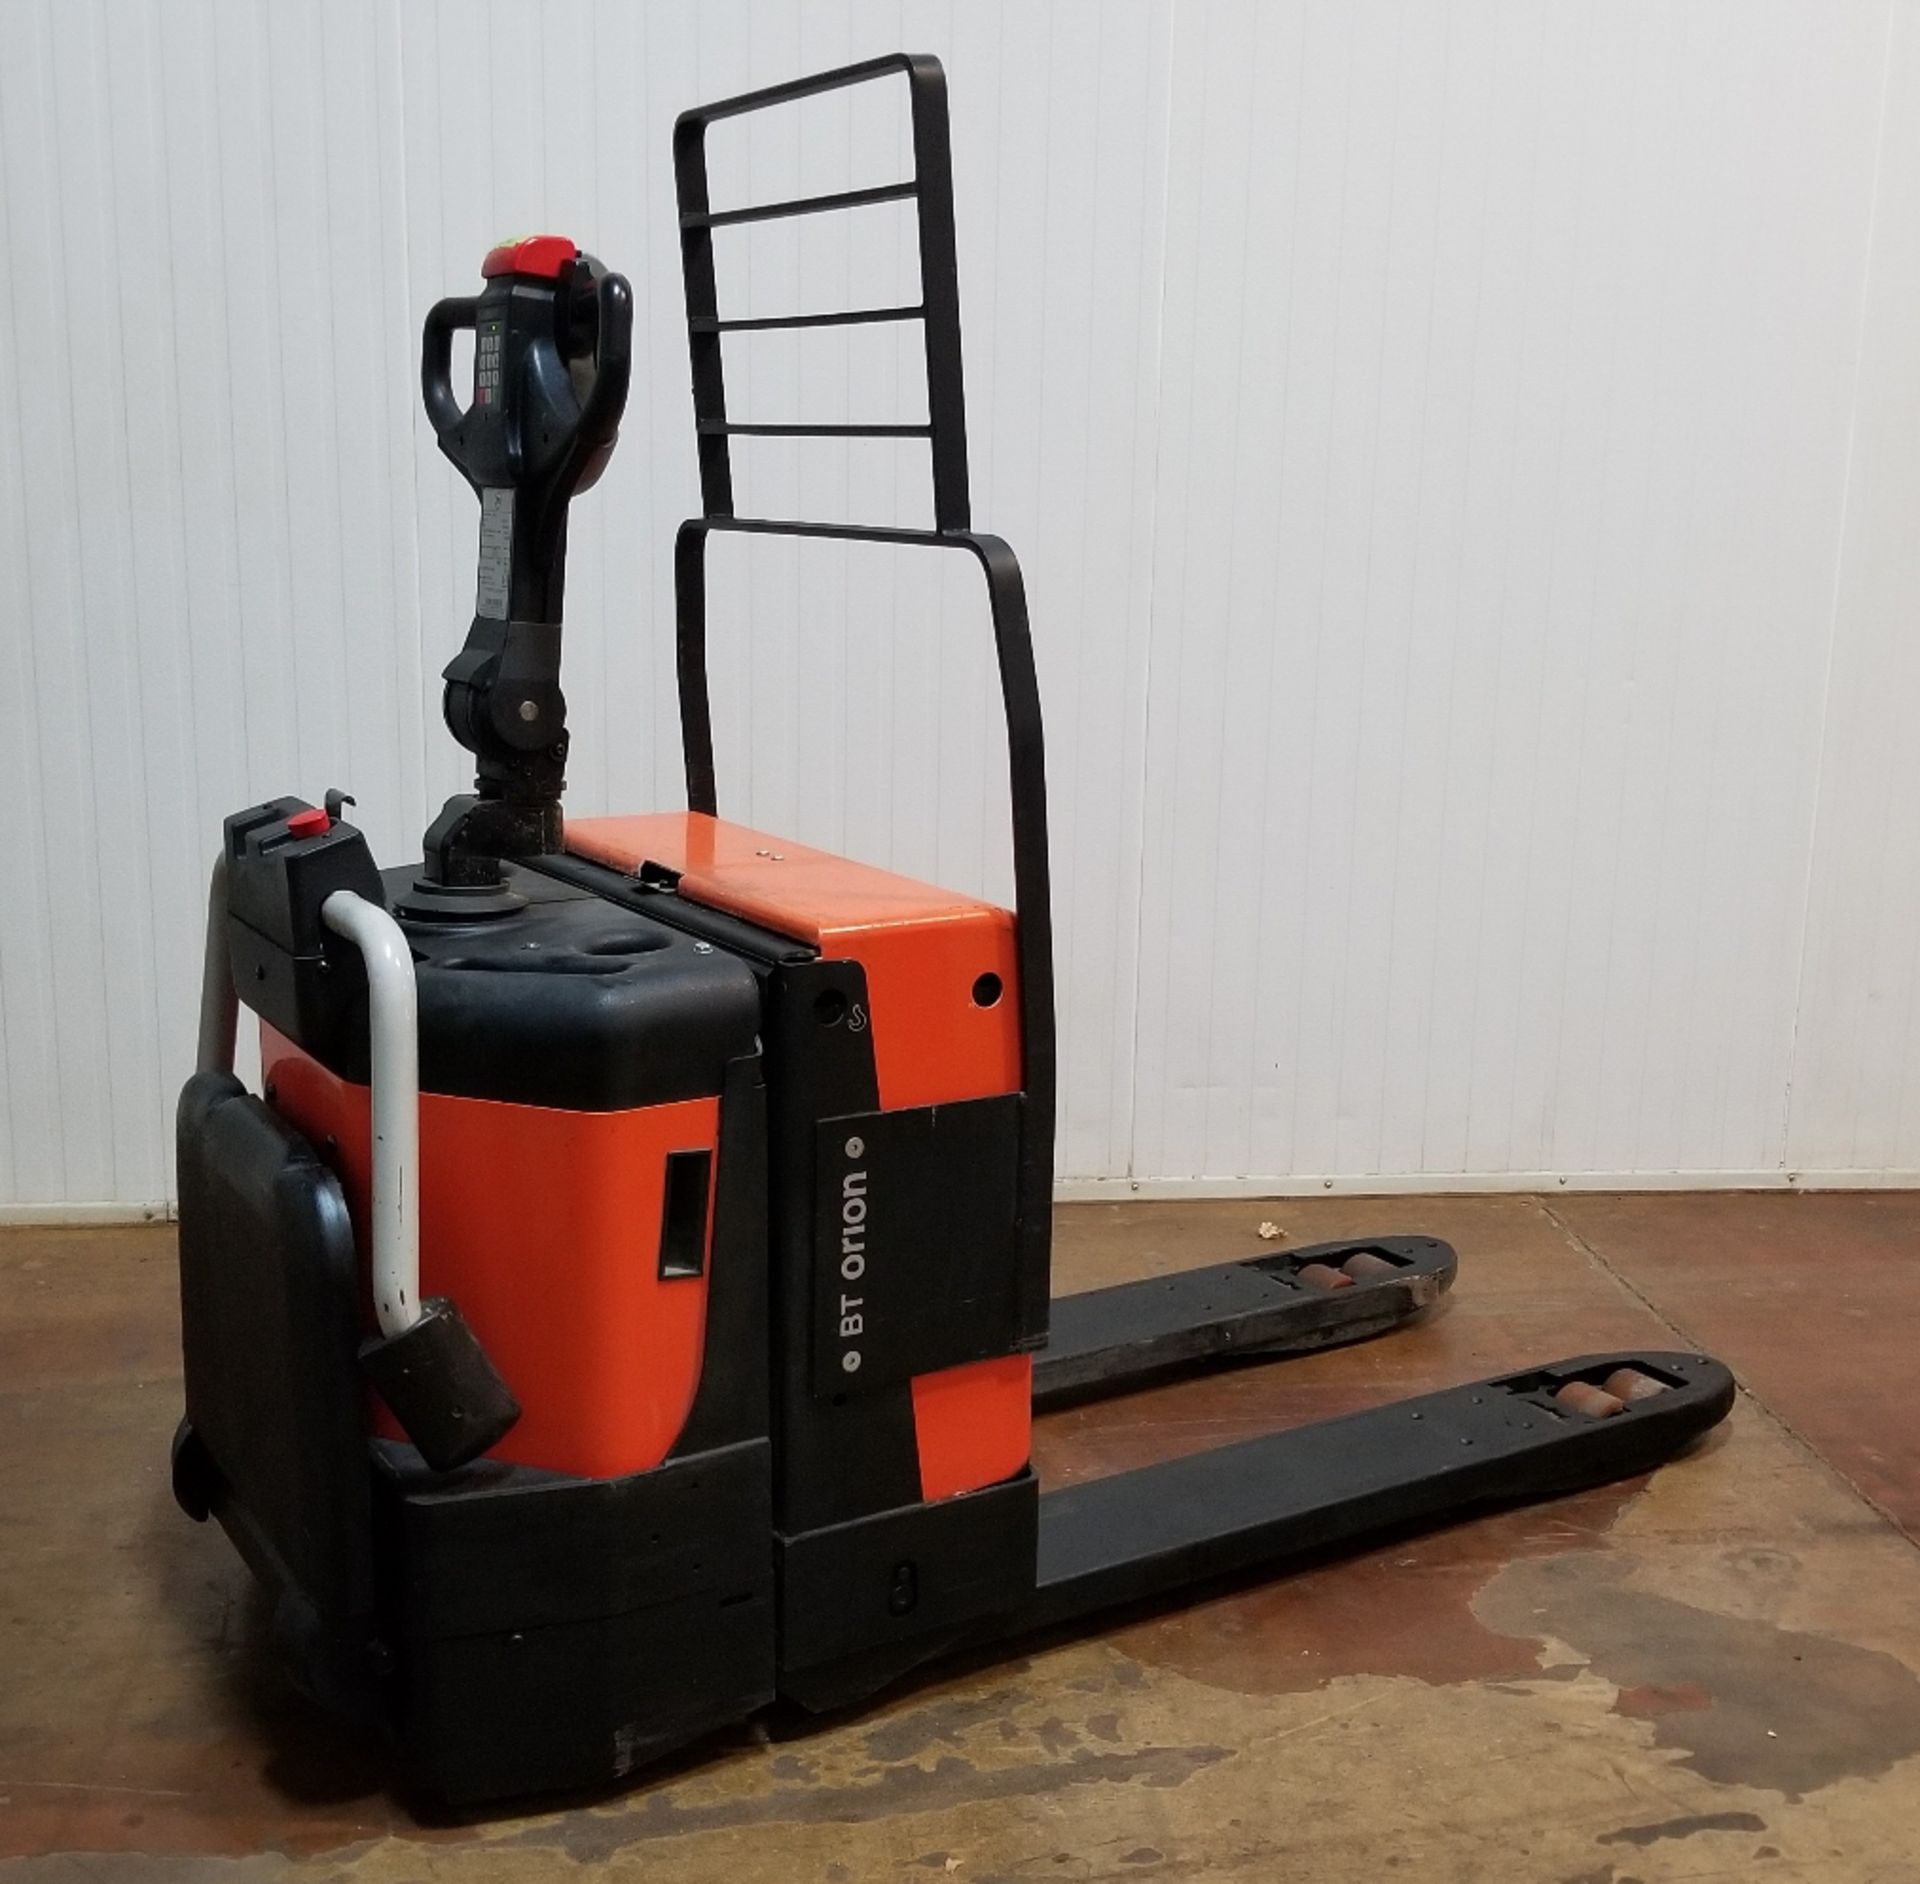 BT (2010) LPE200 4,400 LB. CAPACITY 24V RIDE-ON ELECTRIC PALLET TRUCK